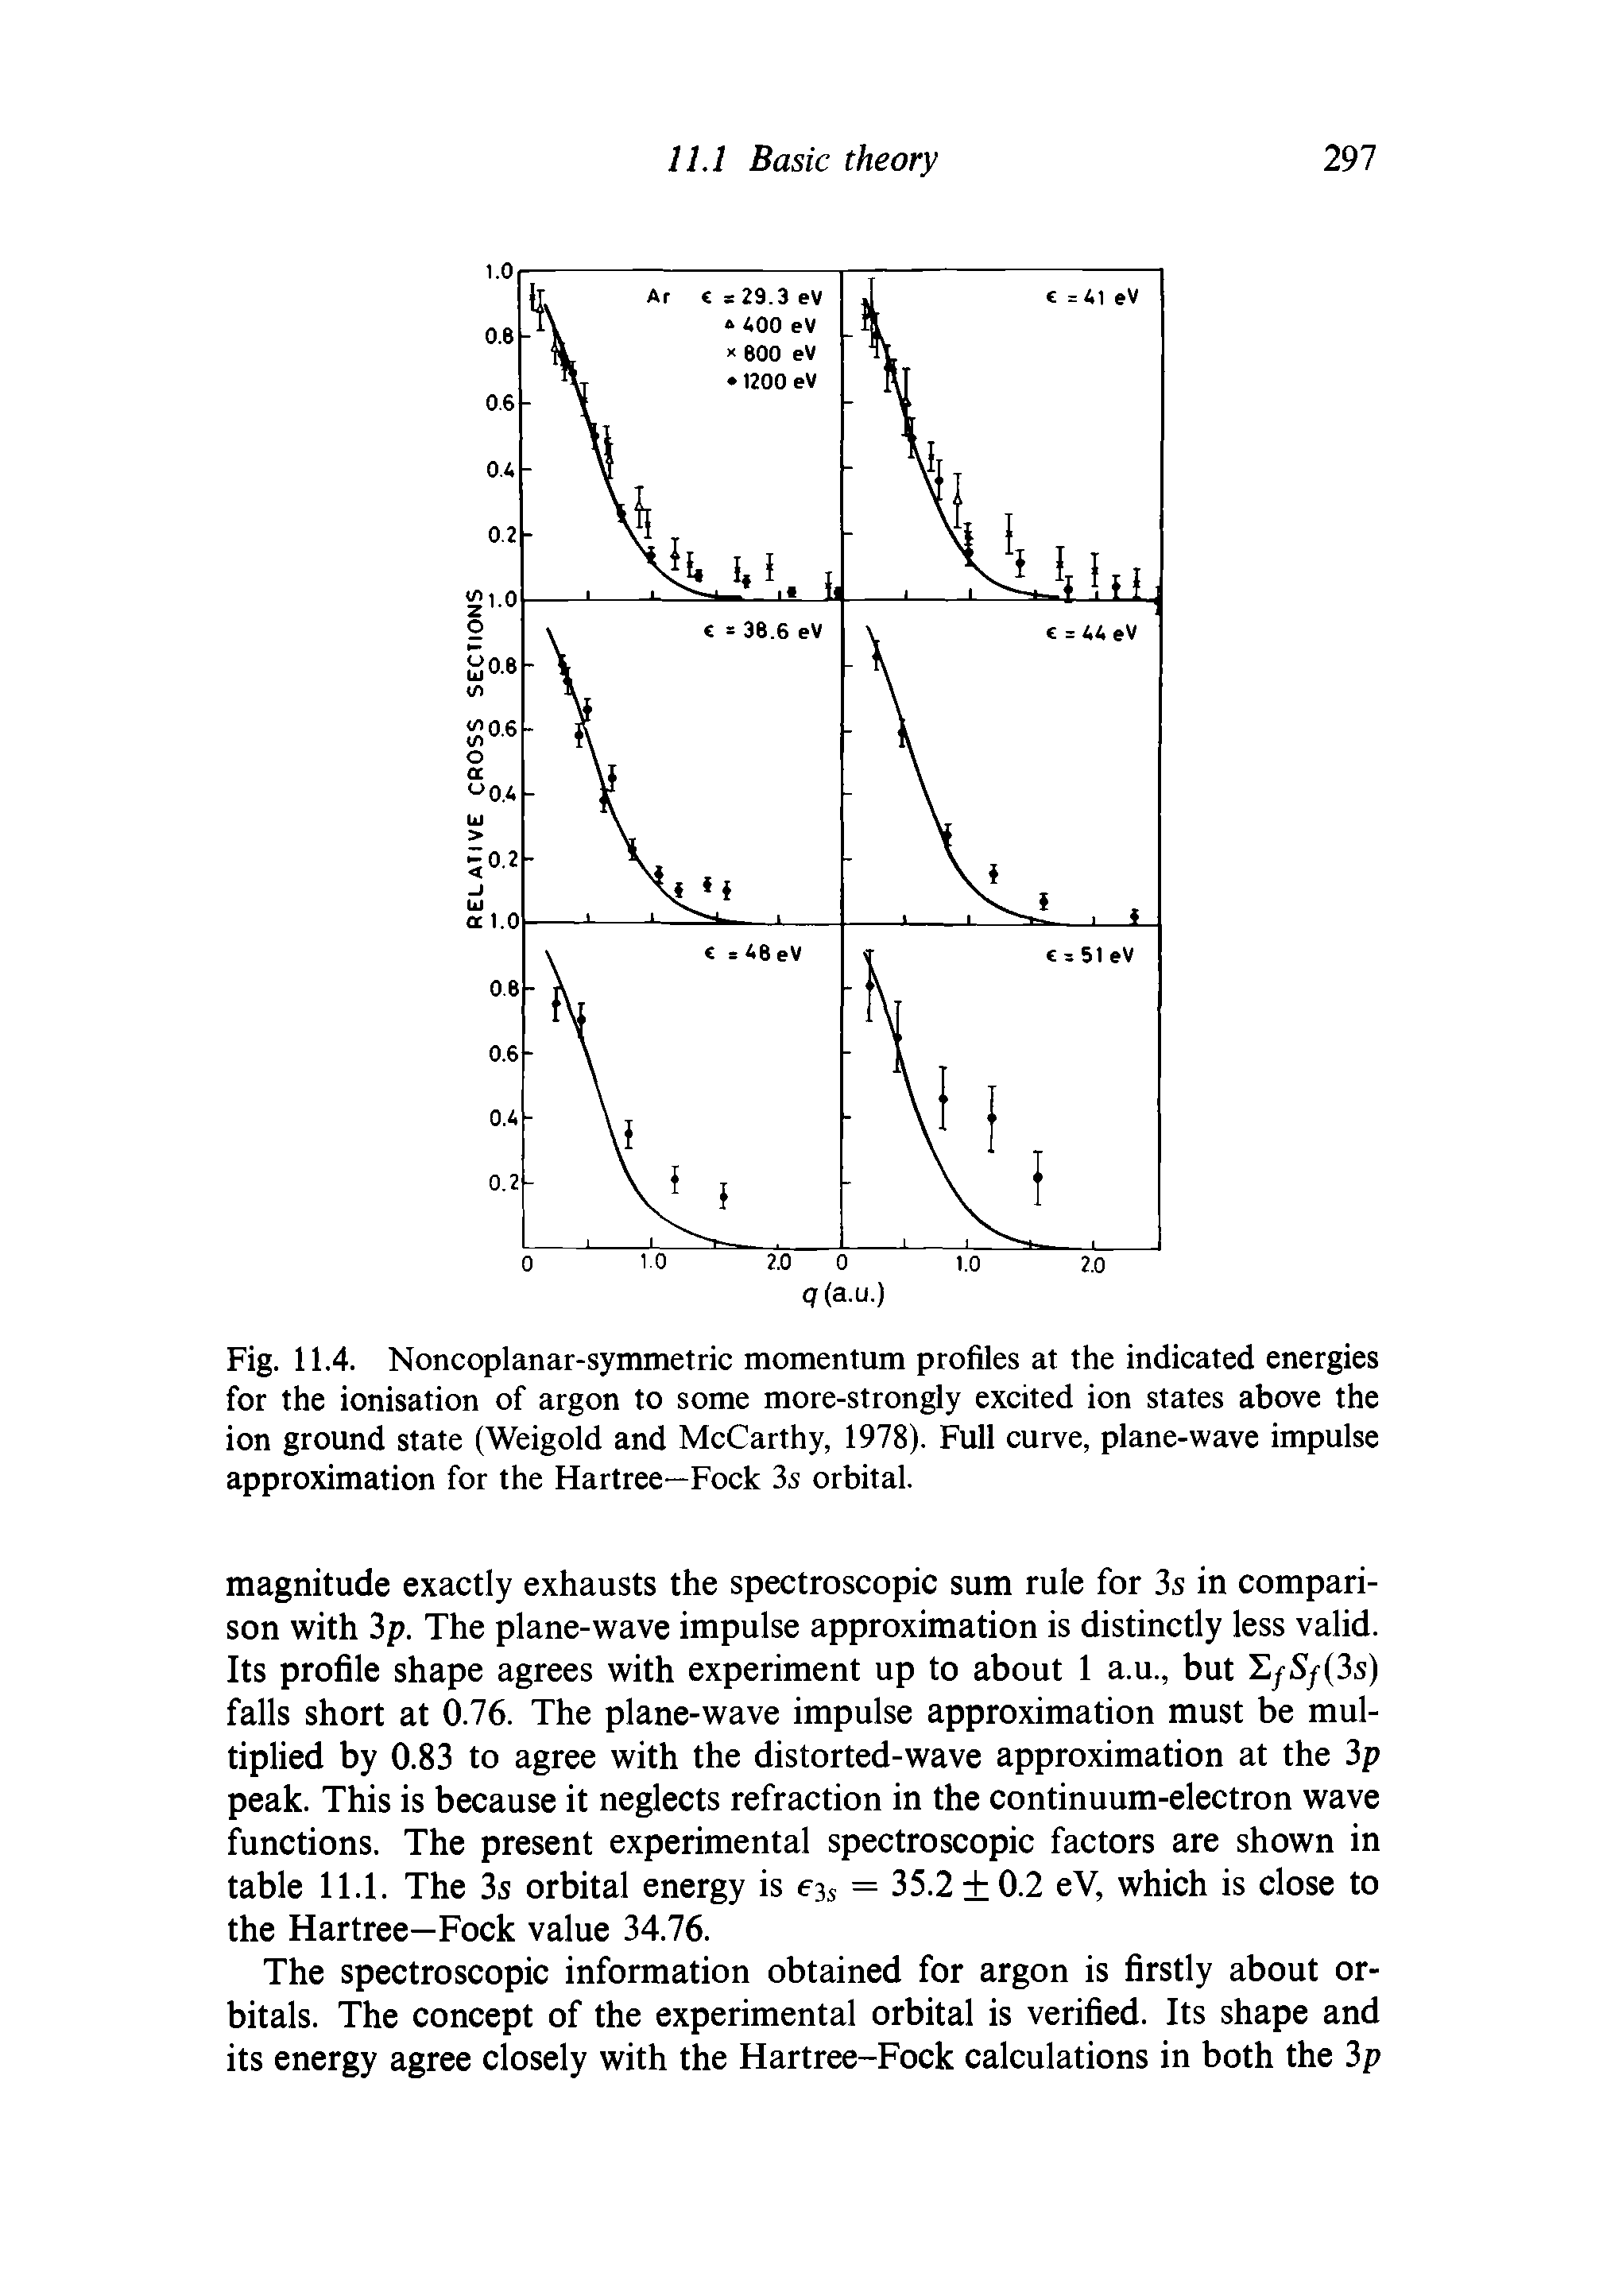 Fig. 11.4. Noncoplanar-symmetric momentum profiles at the indicated energies for the ionisation of argon to some more-strongly excited ion states above the ion ground state (Weigold and McCarthy, 1978). Full curve, plane-wave impulse approximation for the Hartree—Fock 3s orbital.